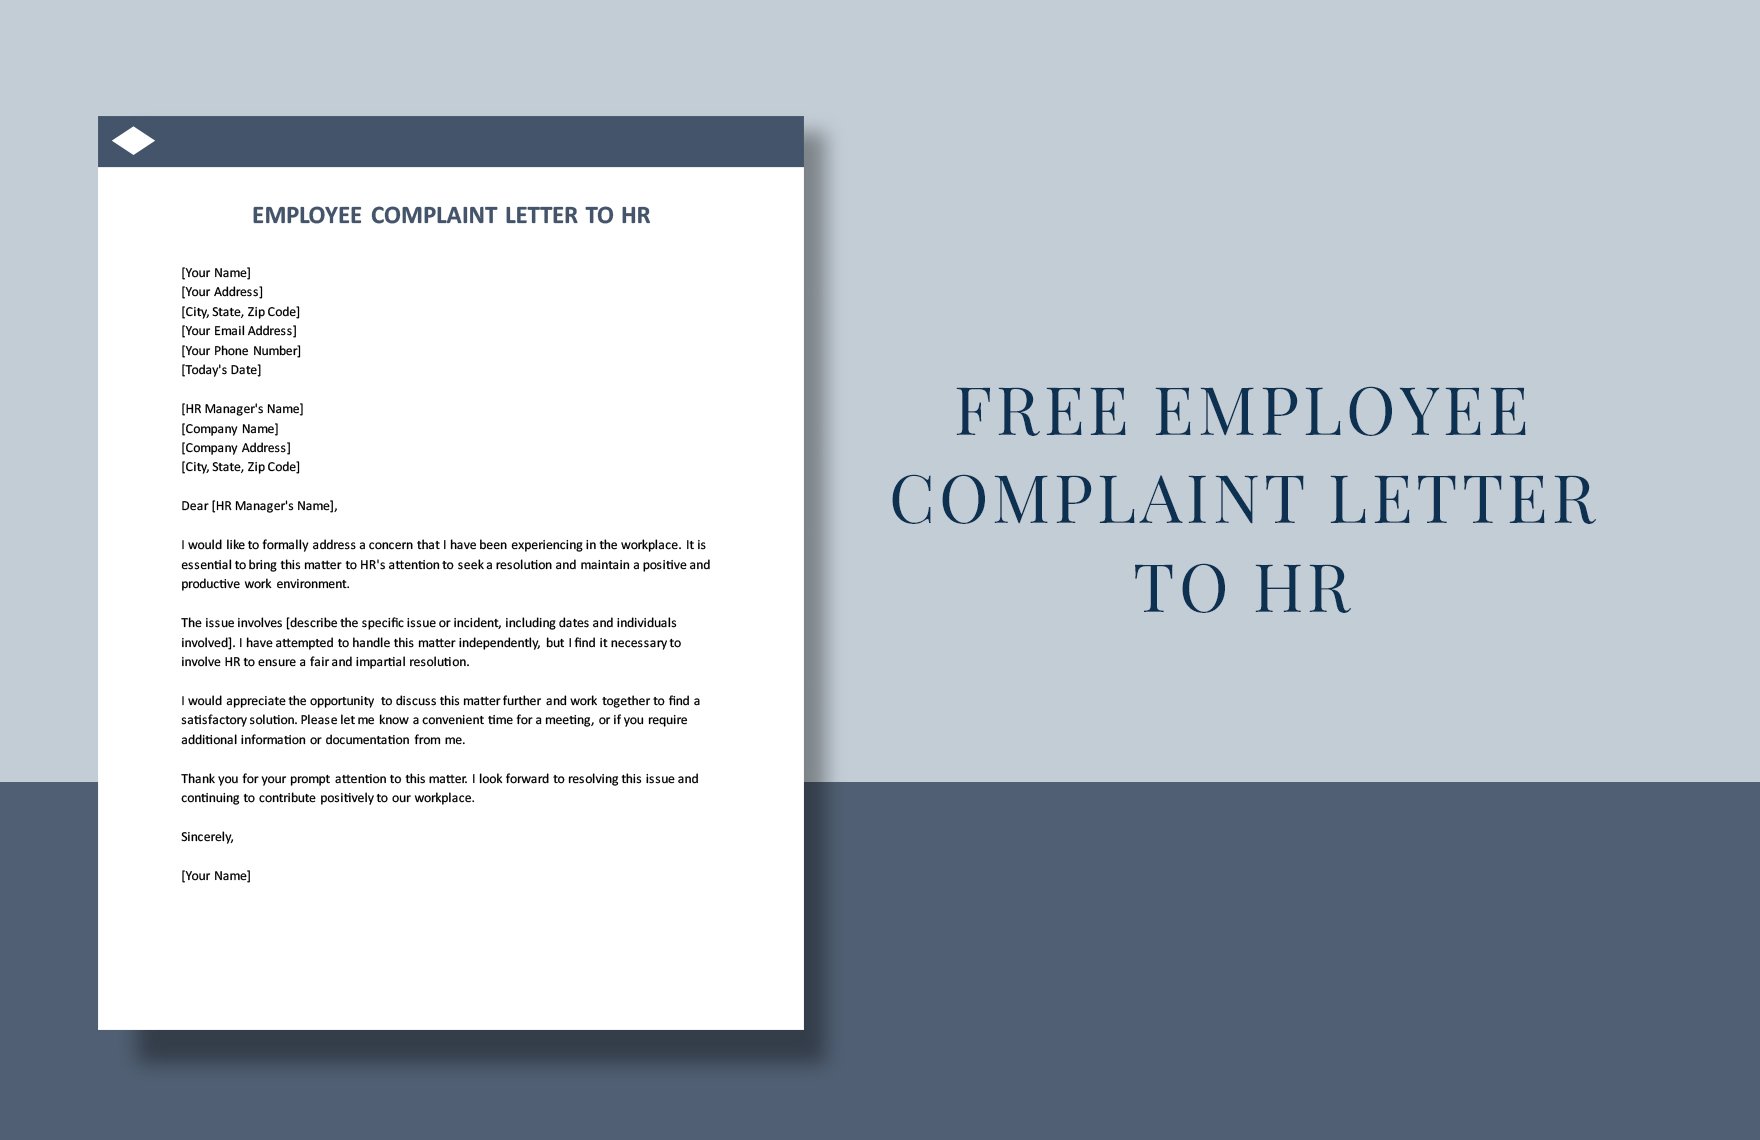 Employee Complaint Letter To Hr